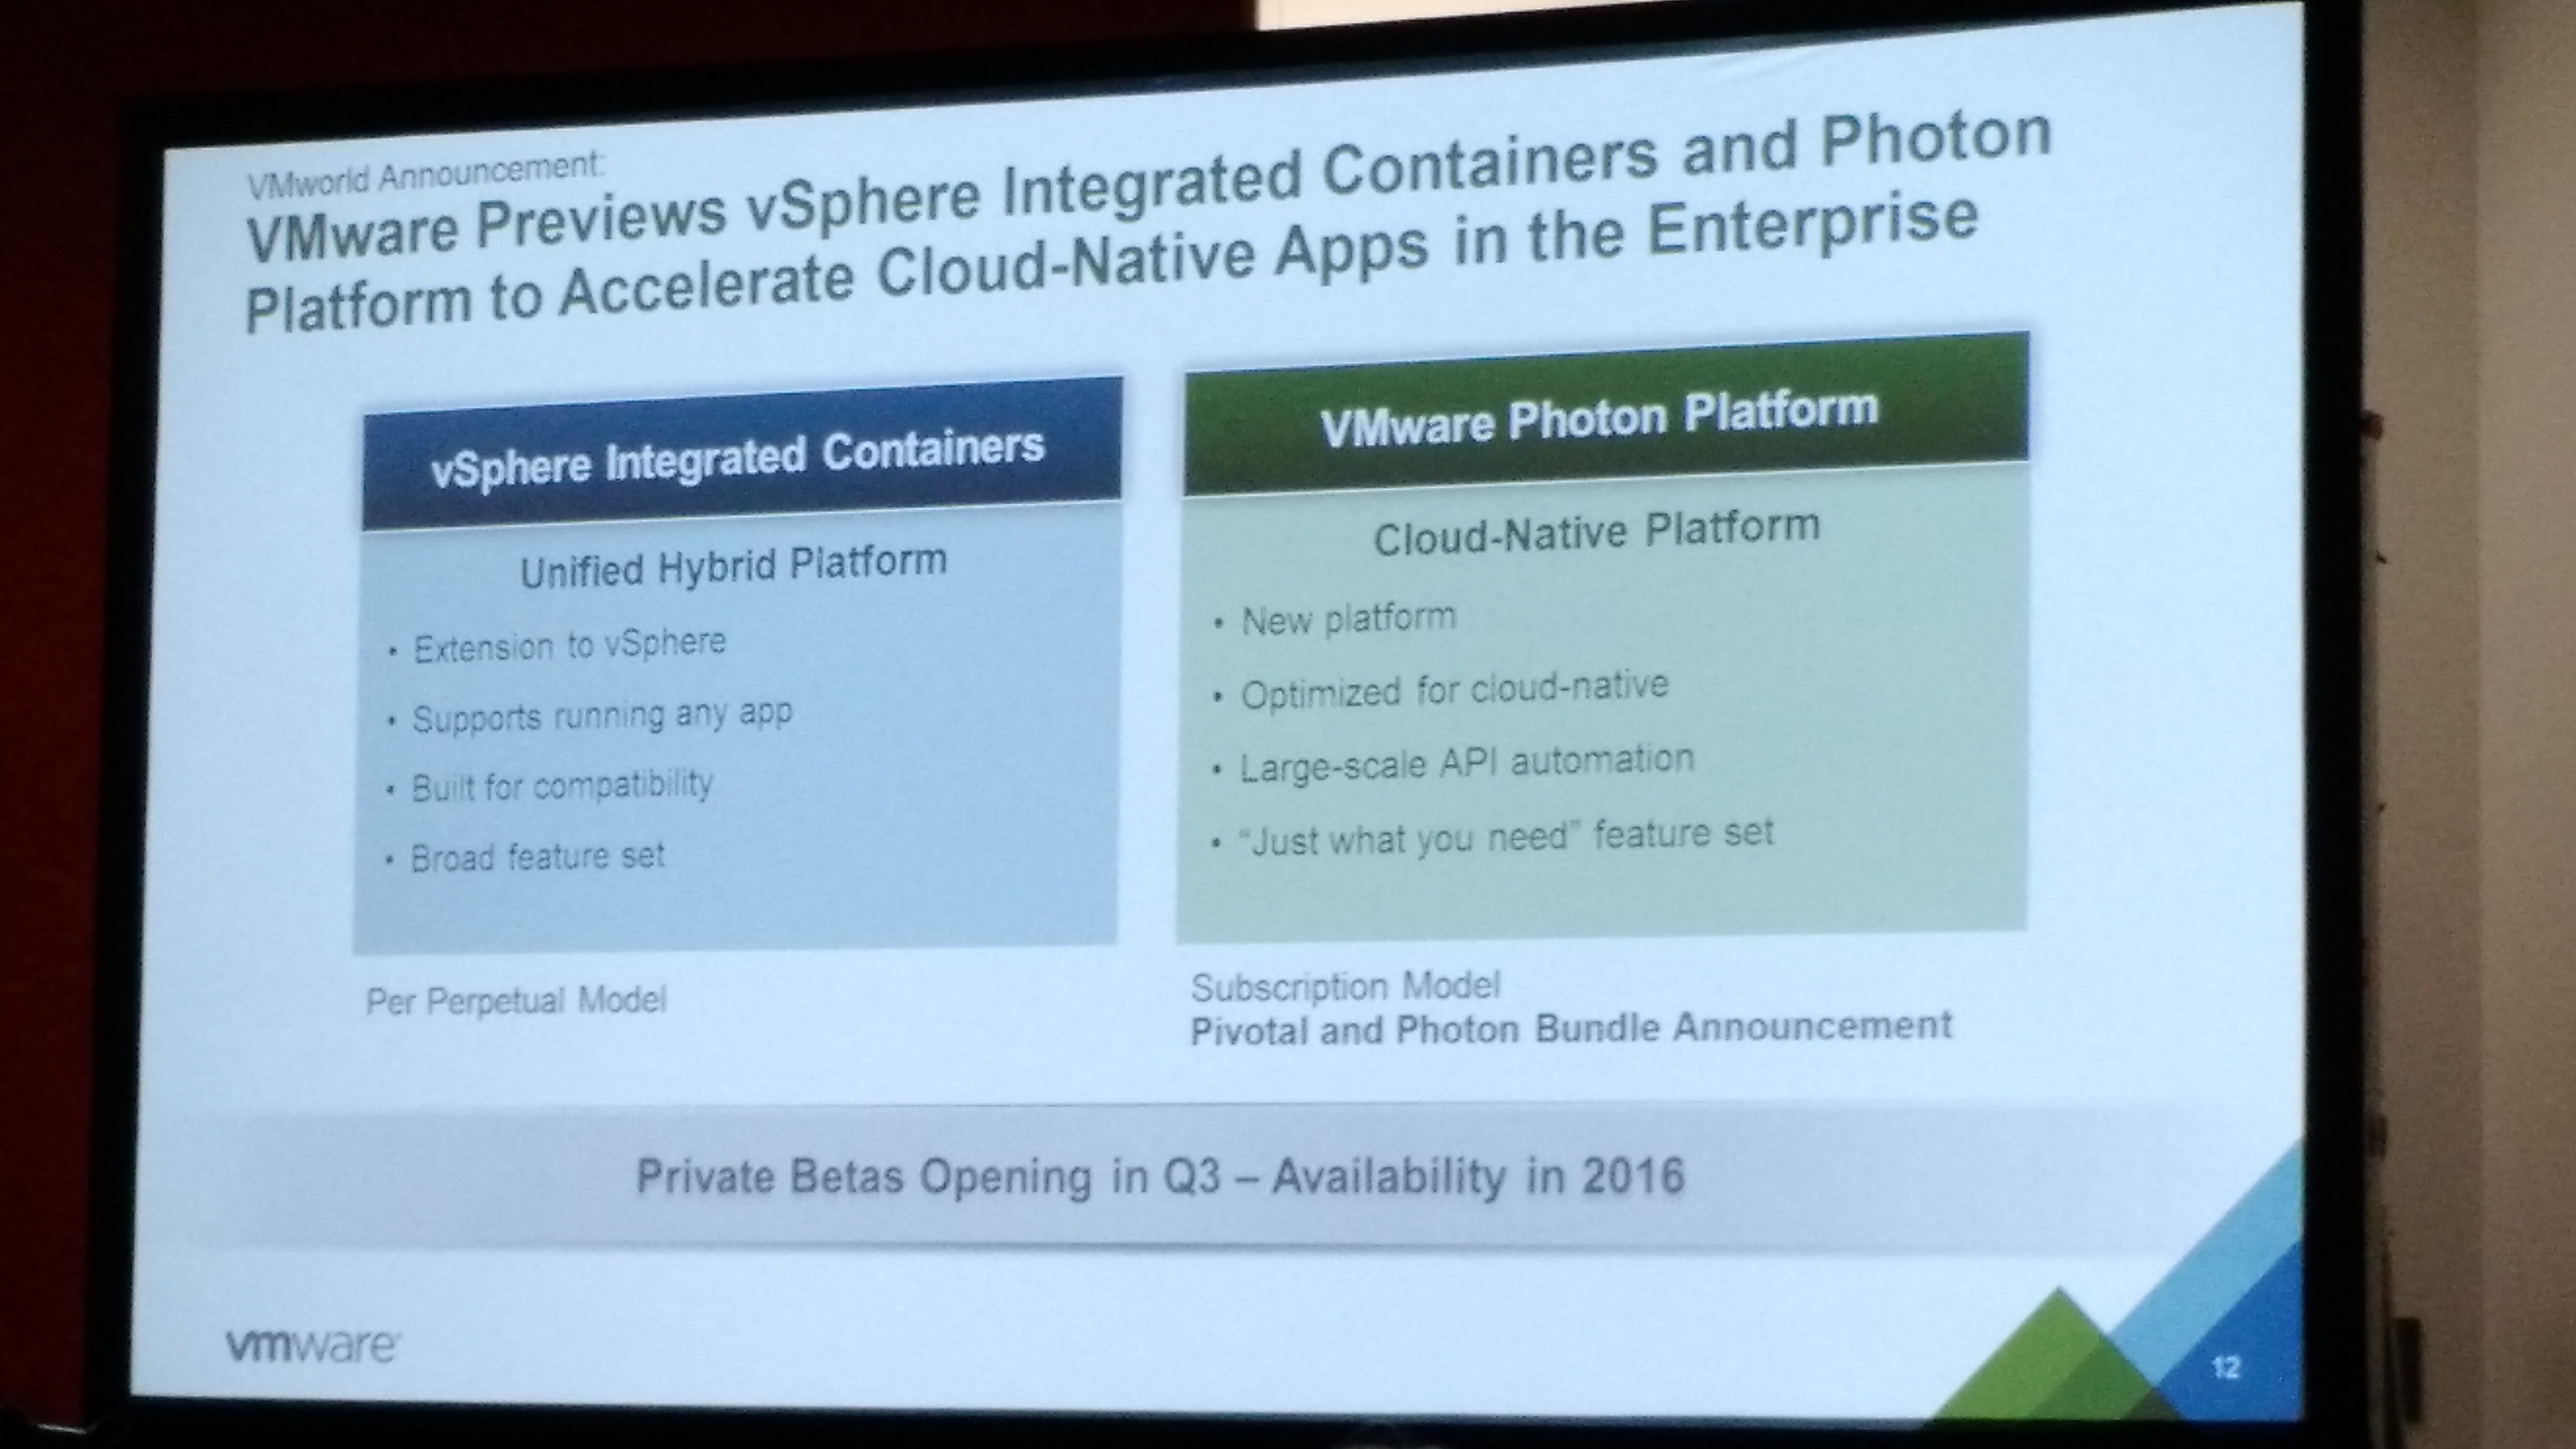 Some detail on vSphere Integrated Containers and Photon Platform from a press conference before the first day's general session at the 2015 VMworld conference in San Francisco on Aug. 31.